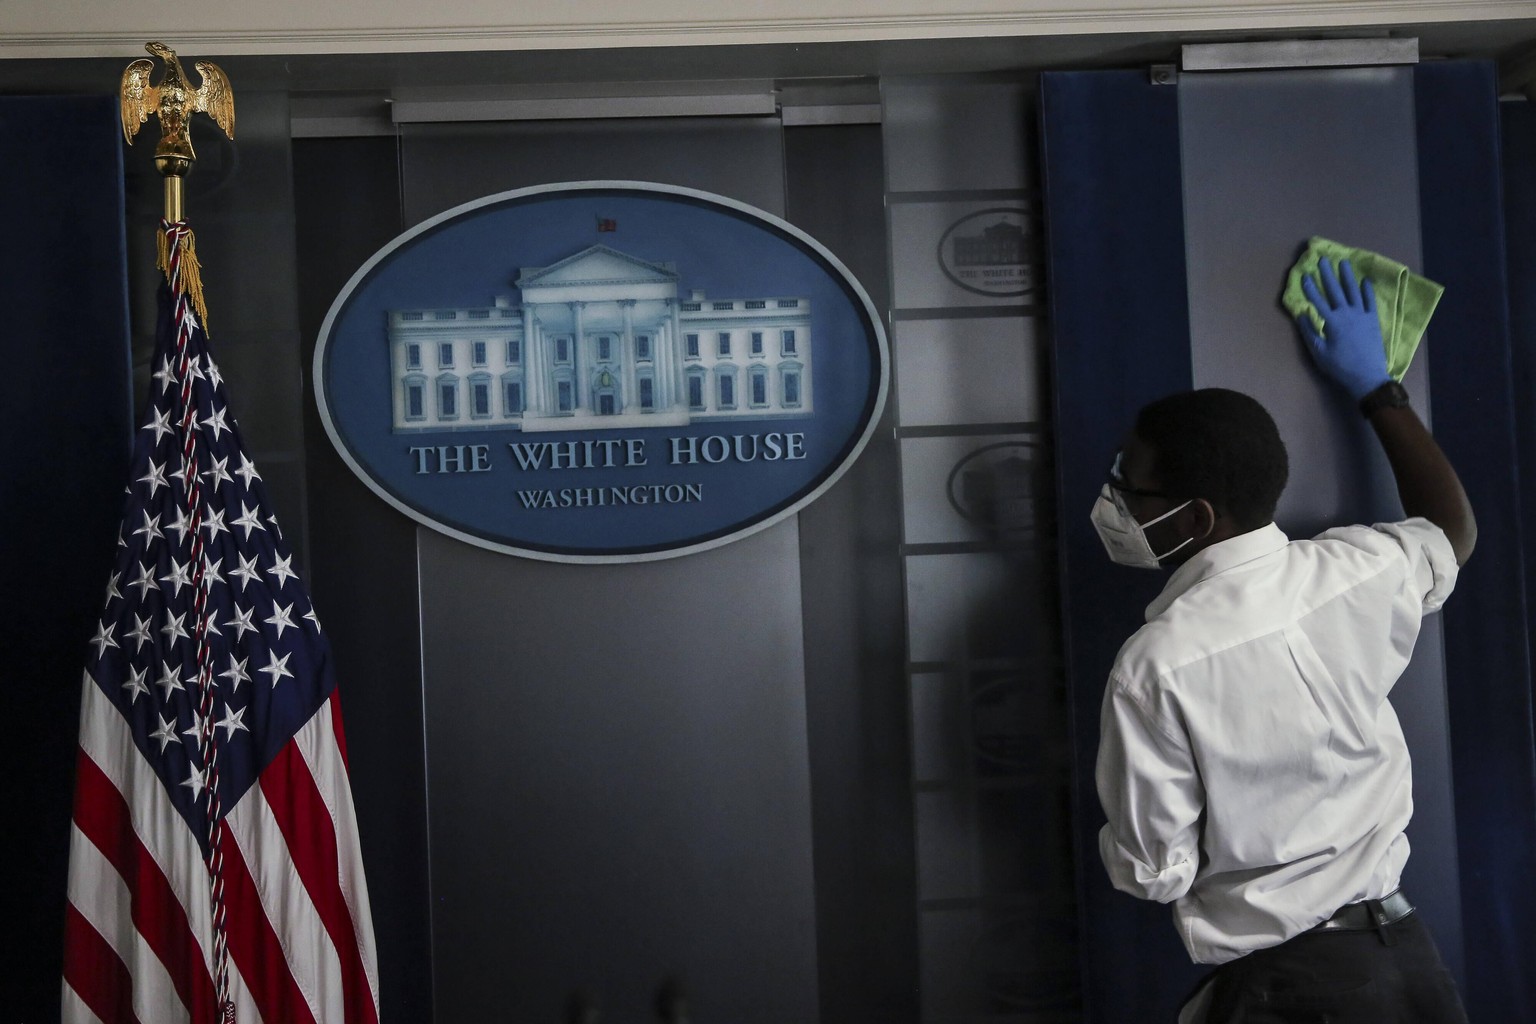 Staff clean the podium area in the James S. Brady Press Briefing Room prior to a press conference held by President Donald Trump, at the White House in Washington, D.C., U.S., on Thursday, August 13,  ...